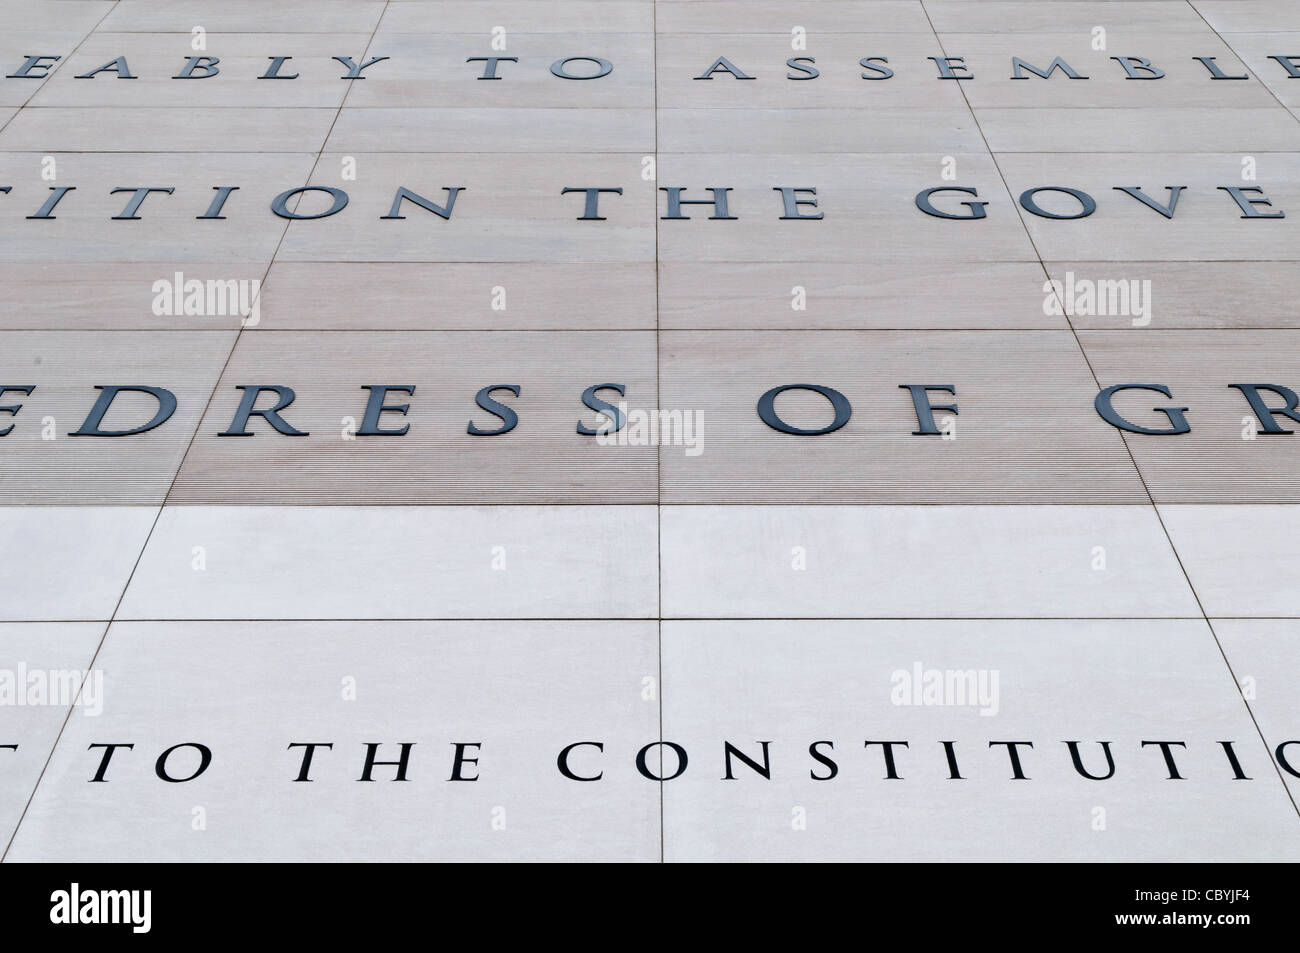 WASHINGTON DC, USA - The exterior of the Newseum in Washington DC features a large extract carved in stone of the First Amendment to the Constitution that provides for freedom of the Press. The Newseum is a 7-story, privately funded museum dedicated to journalism and news. It opened at its current location on Pennsylvania Avenue in April 2008. Stock Photo